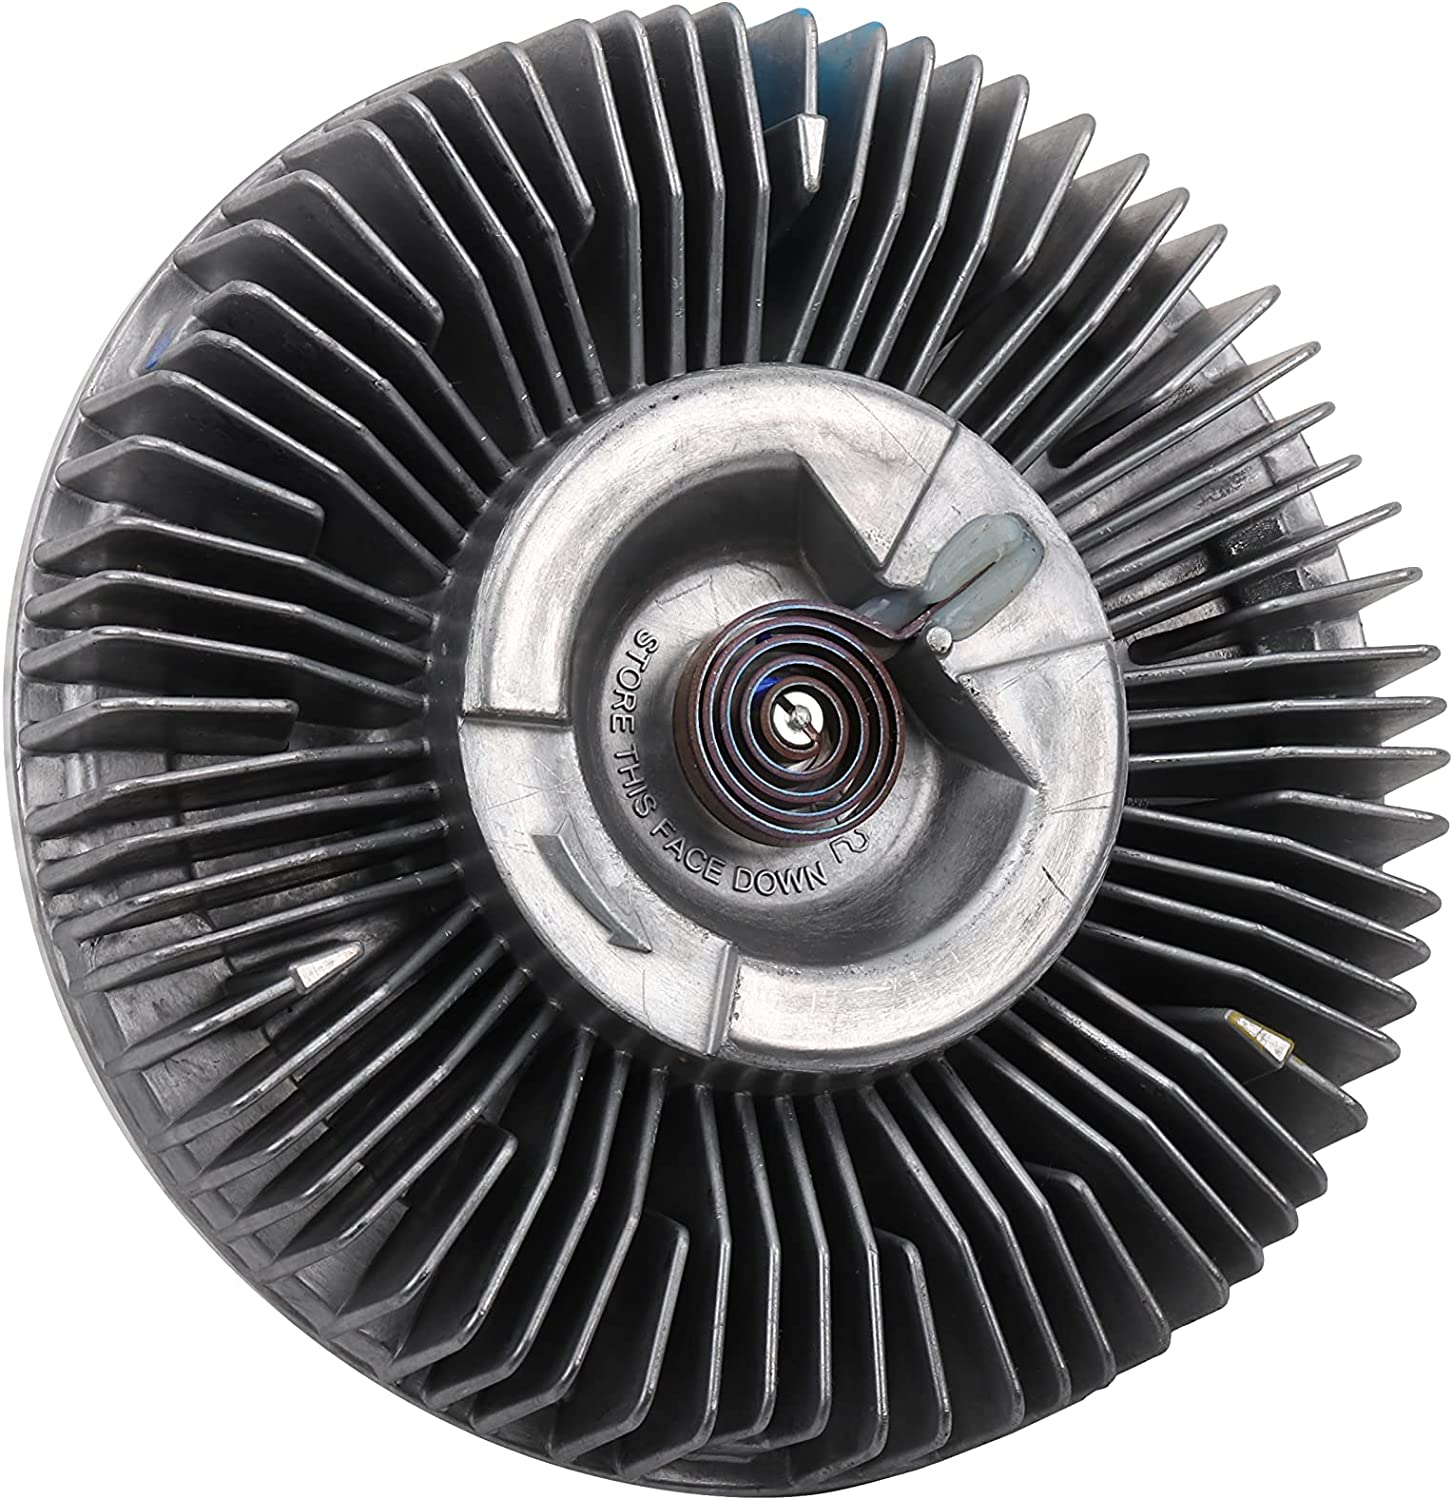 ACDelco 15-4694 GM OE Specification Auto Engine Cooling Fan Clutch